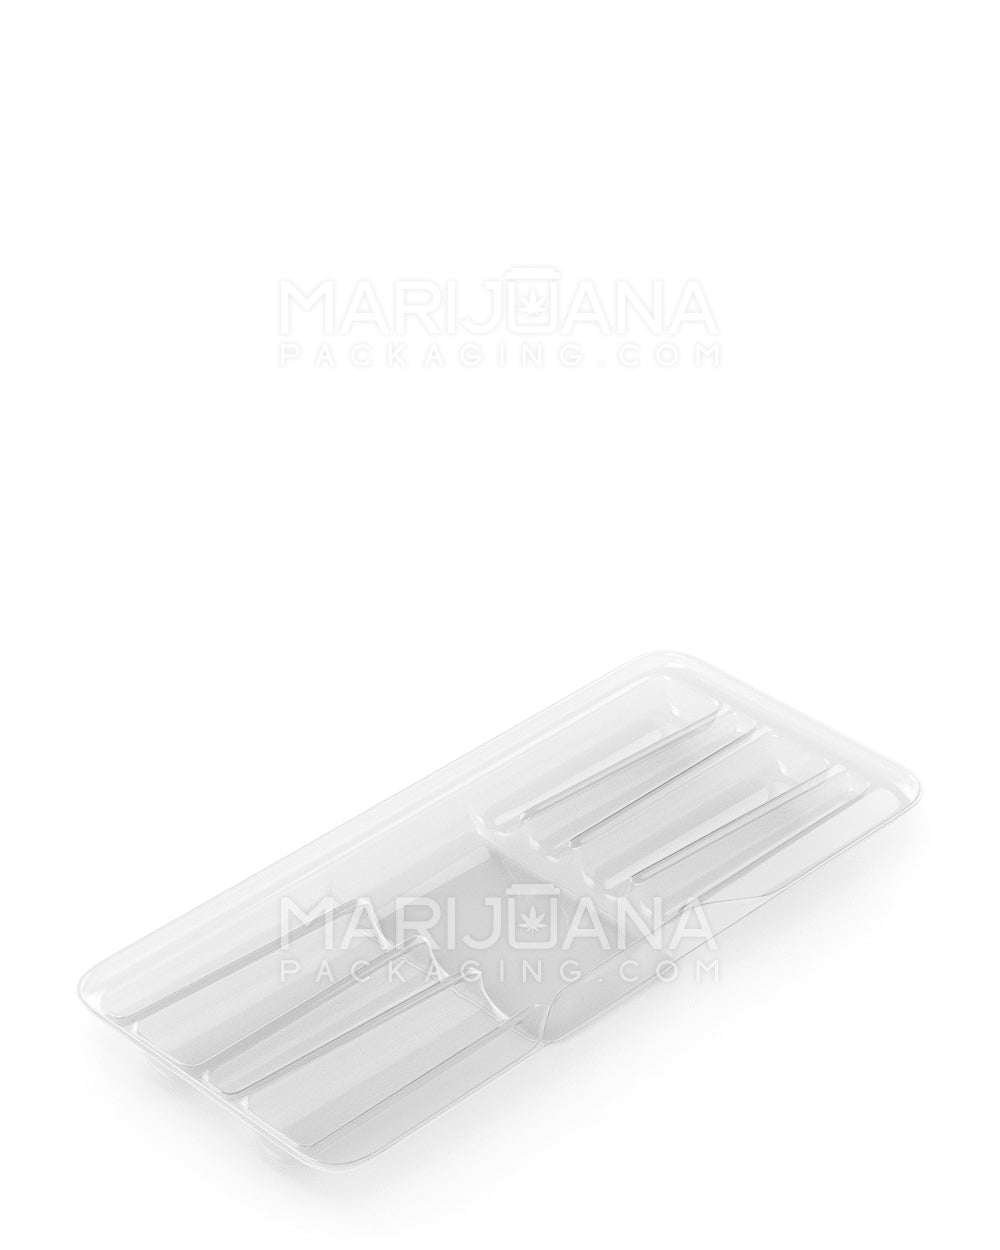 Edible & Joint Box Insert Tray for 4 King Size Pre Rolled Cones | 109mm - Clear Plastic - 100 Count - 4